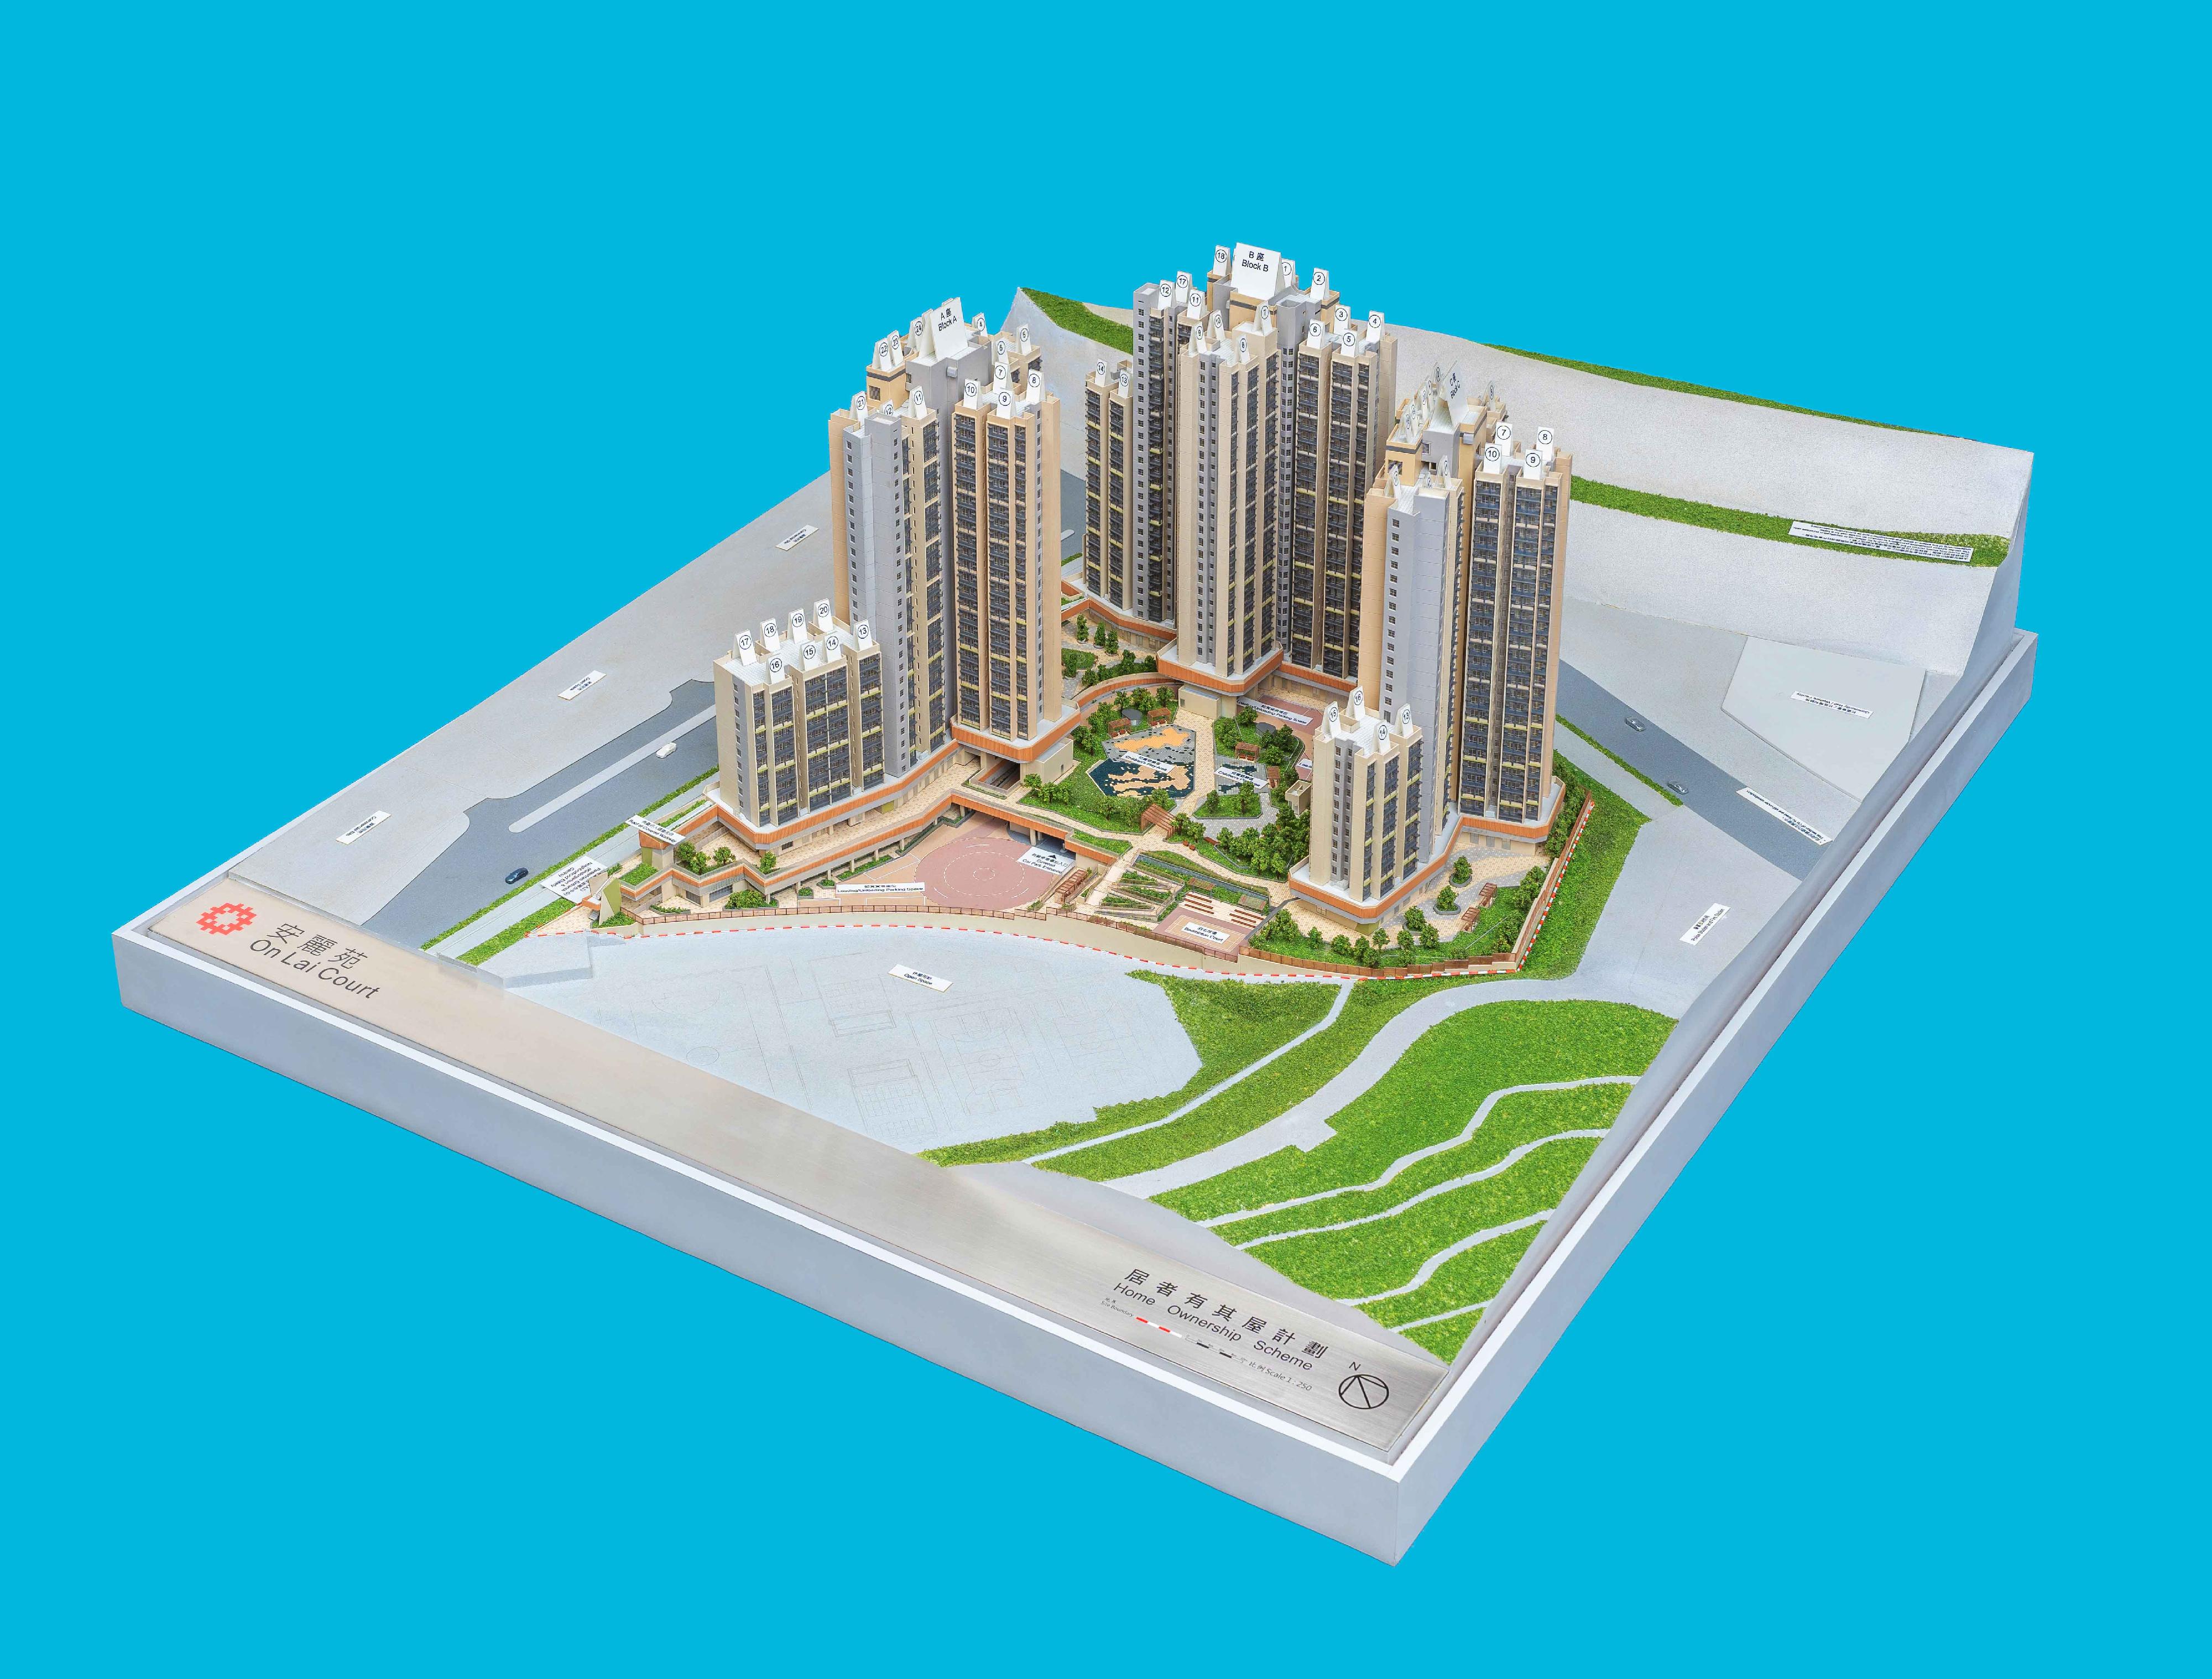 Applications for purchase under the Sale of Home Ownership Scheme Flats 2023 will start on July 31. Photo shows a model of On Lai Court, a new development project under the scheme.





